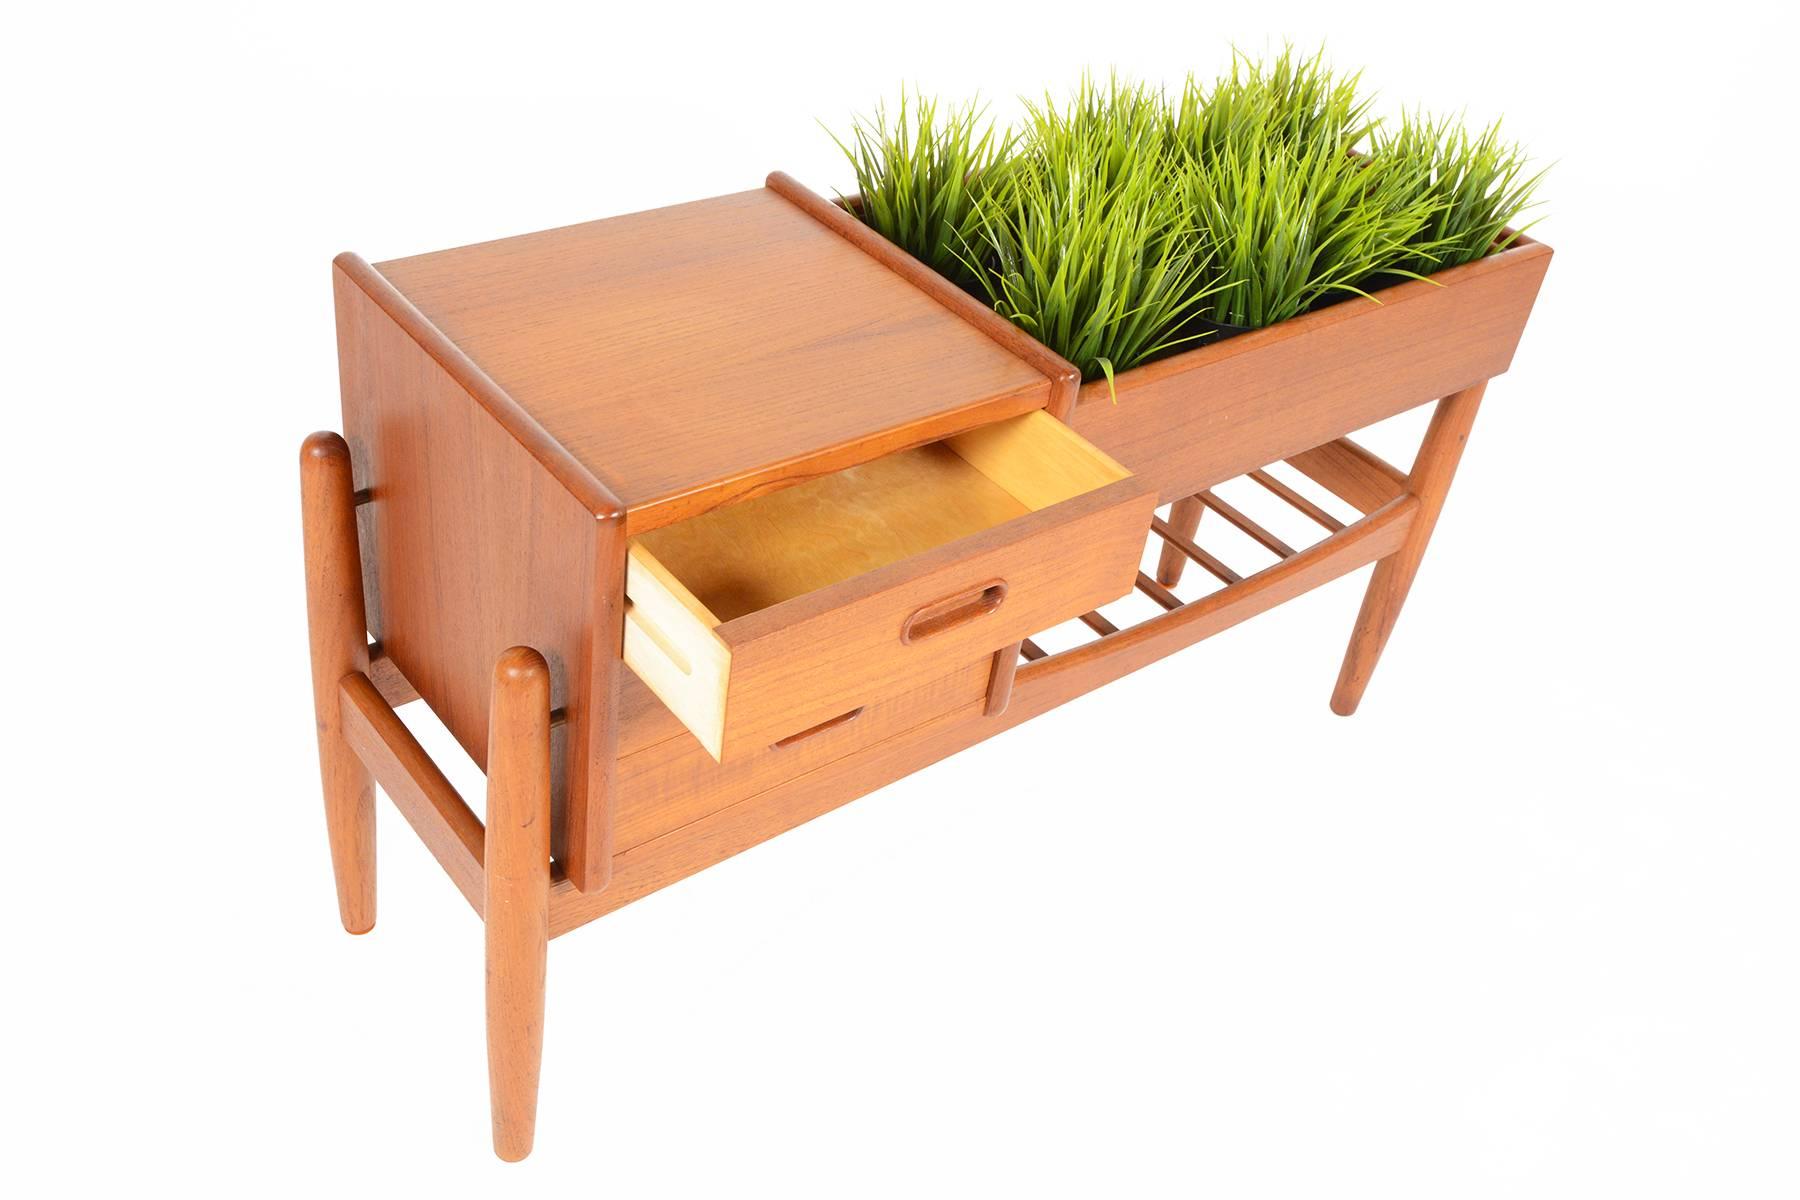 This Danish modern teak entry chest with planter No. 36 was designed by Arne Wahl Iversen for Vamo Møbelfabrik and is perfect for any modern entry way or living room. With exposed legs, three lower drawers and a lower doweled rack, this piece is not